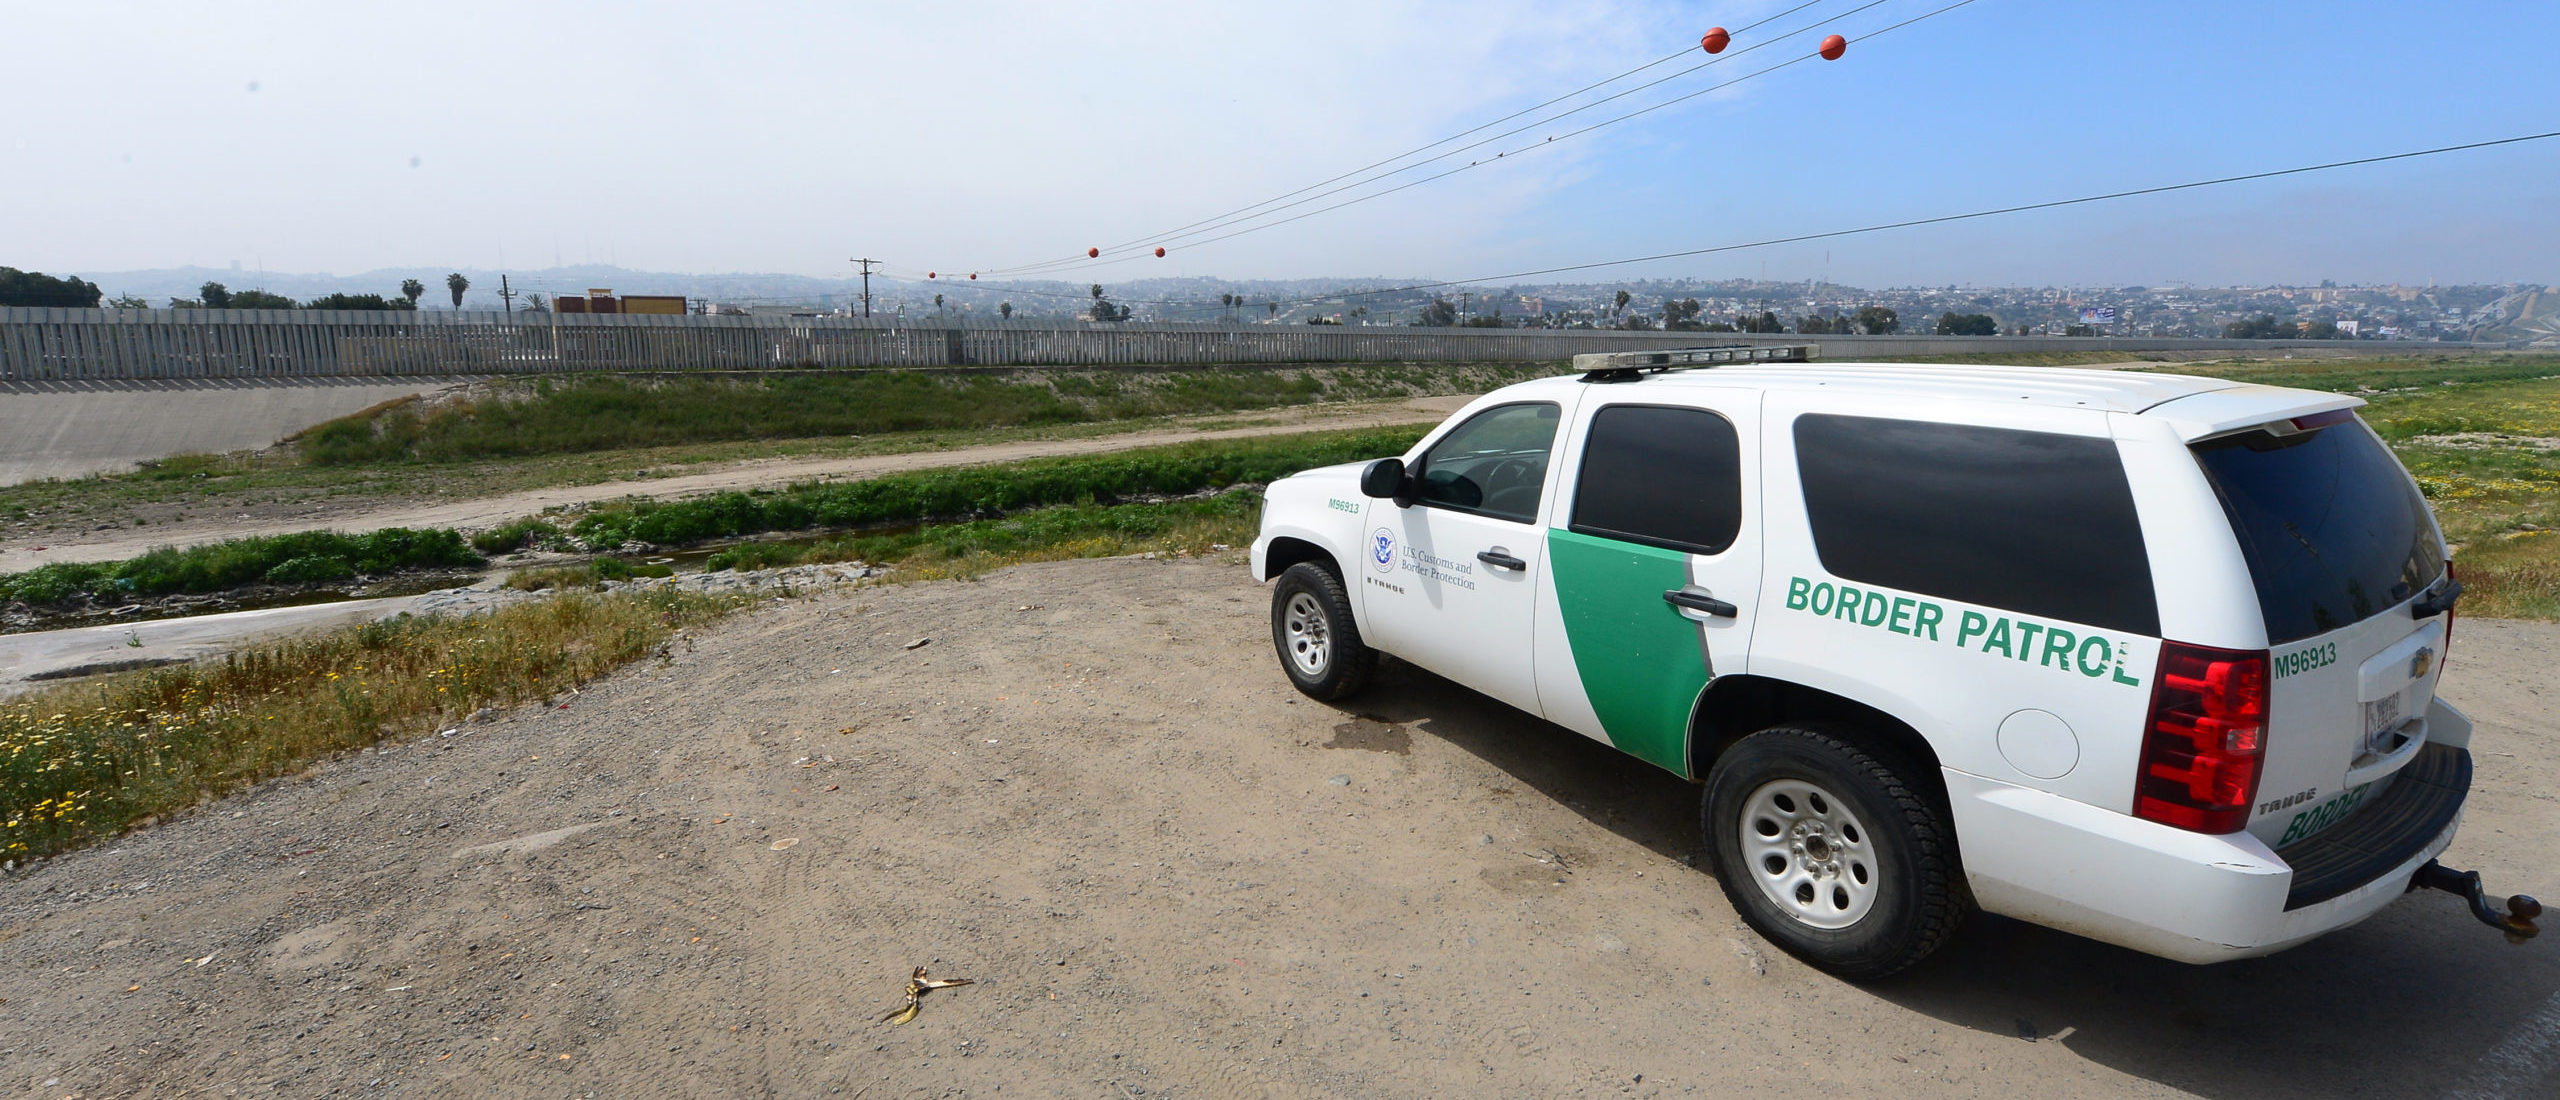 U.S. Border Patrol agent on ATV dies in accident while on duty